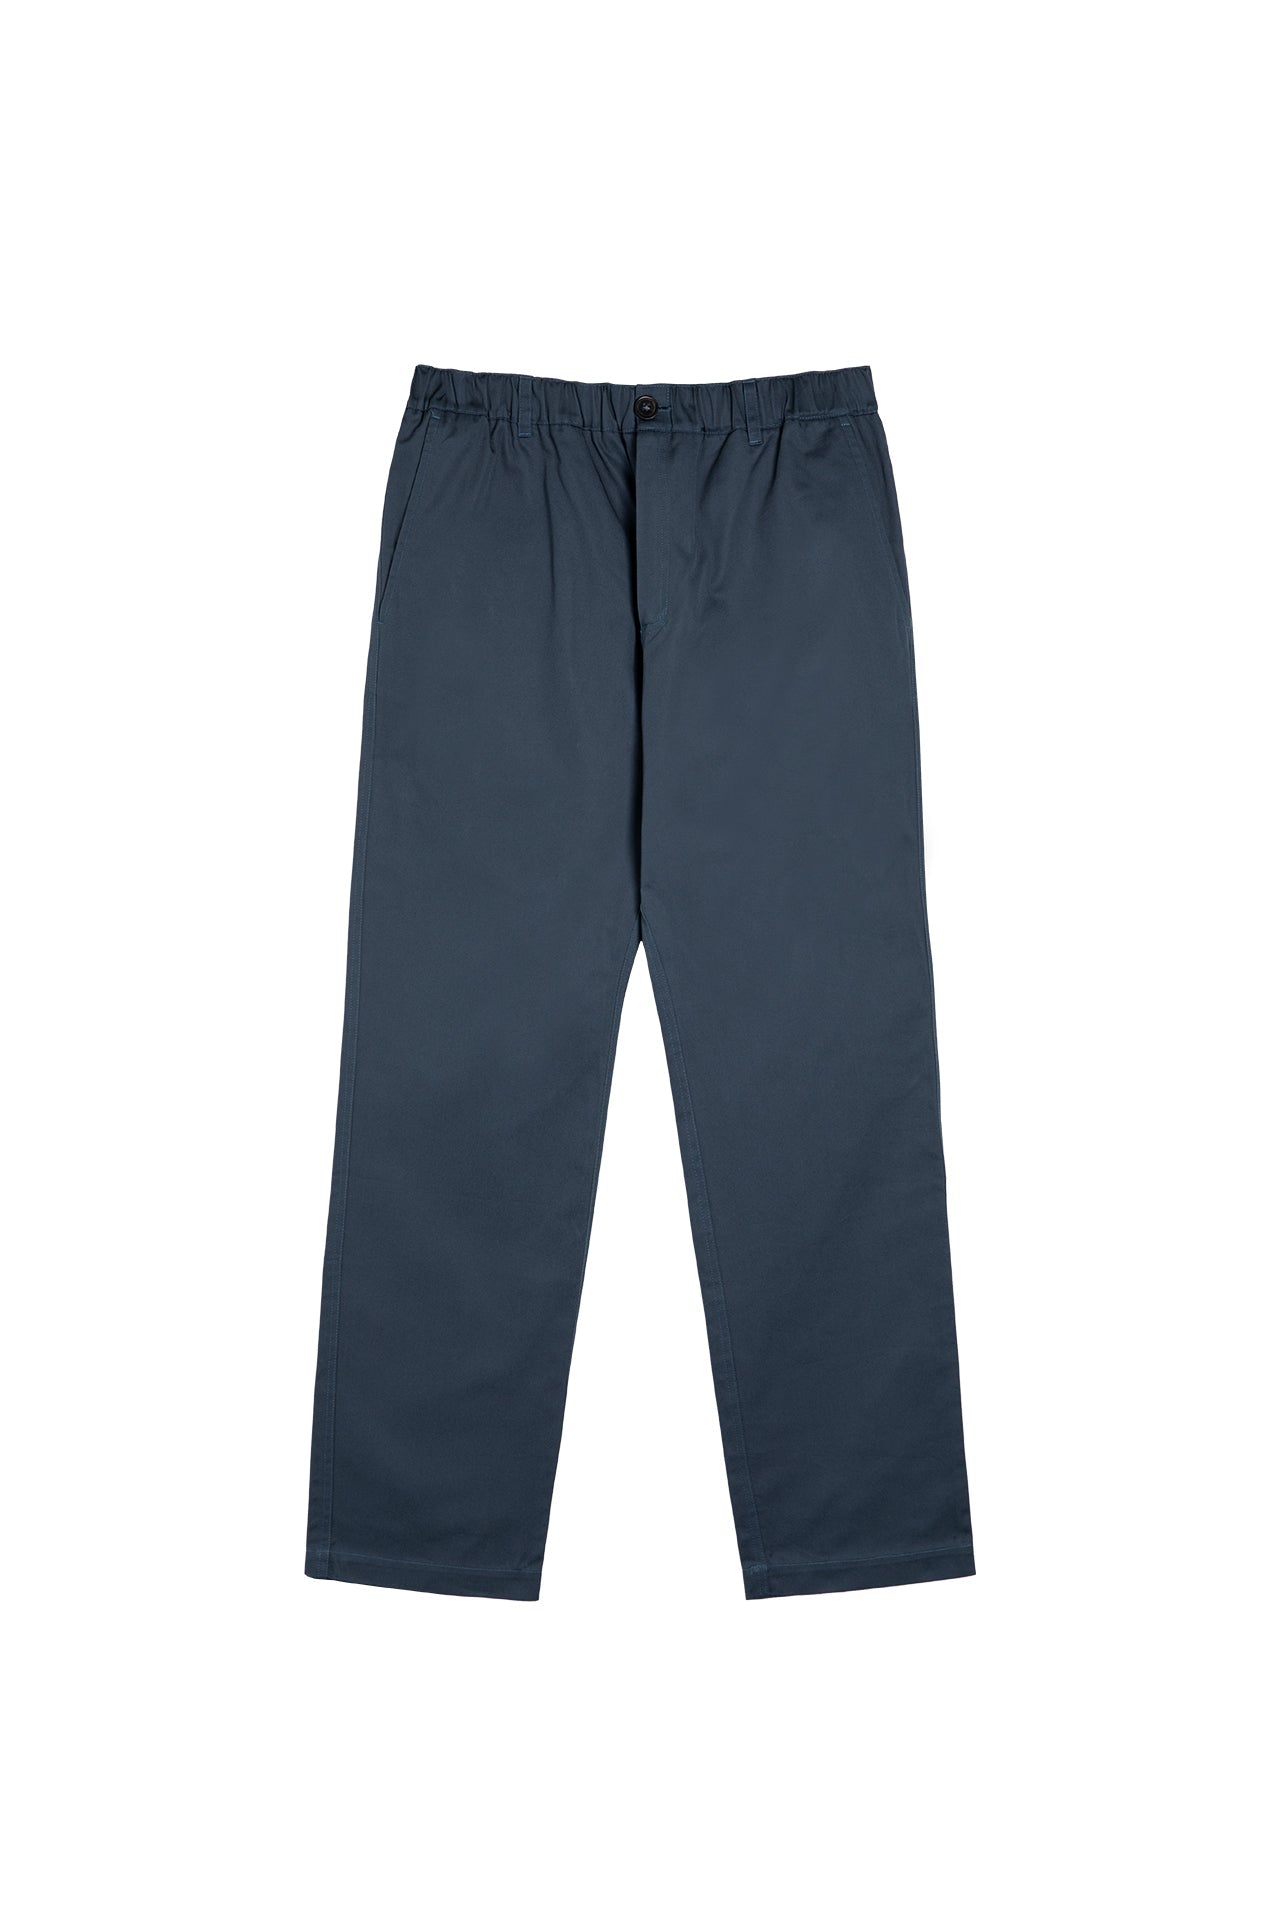 Relaxed-fit easy pants in Japanese cotton twill, made in France.